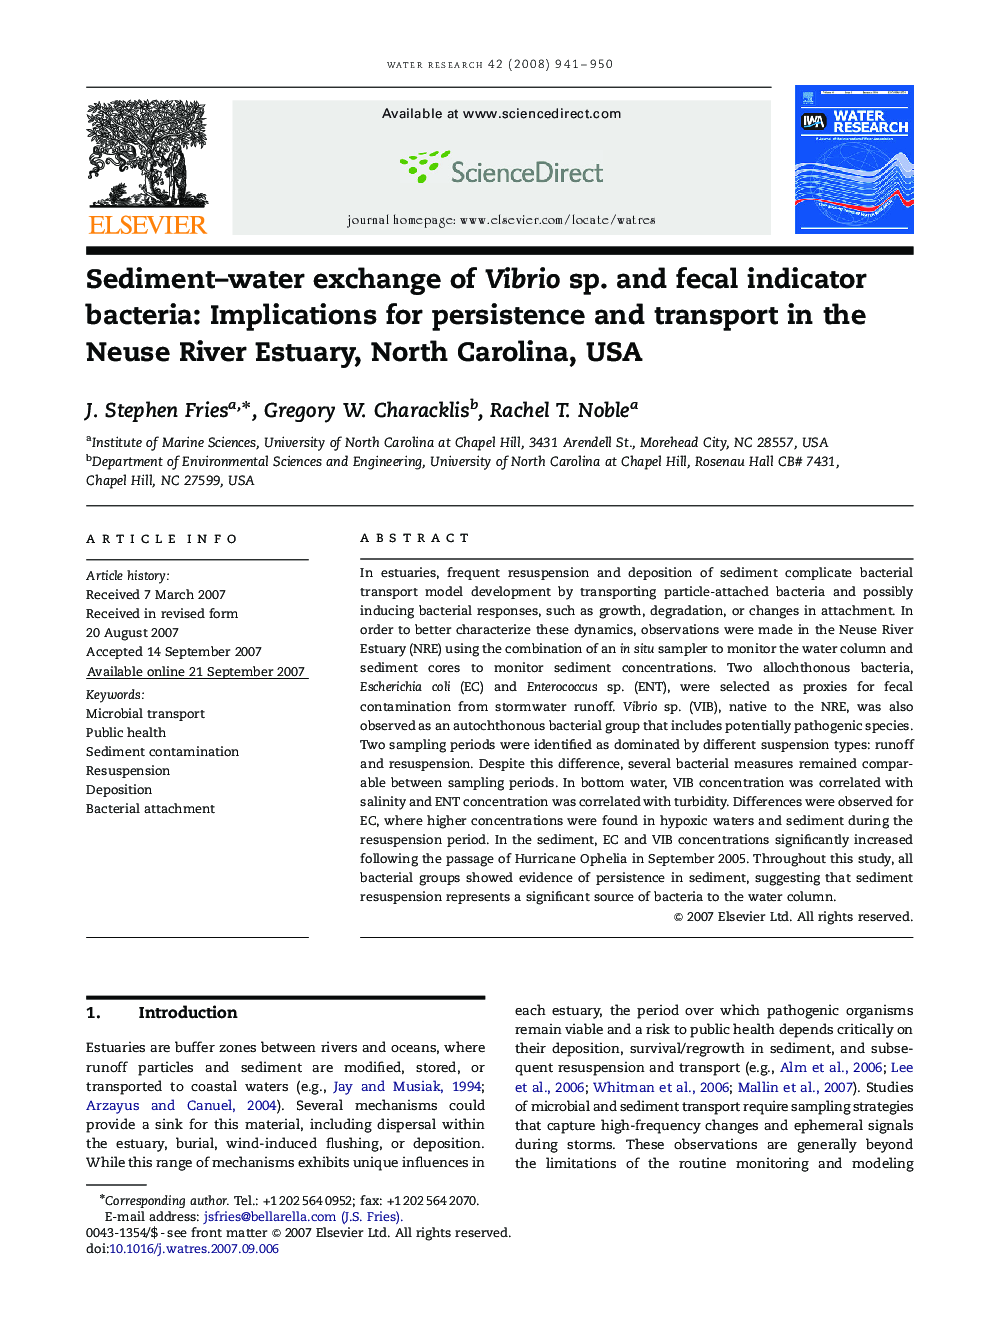 Sediment–water exchange of Vibrio sp. and fecal indicator bacteria: Implications for persistence and transport in the Neuse River Estuary, North Carolina, USA